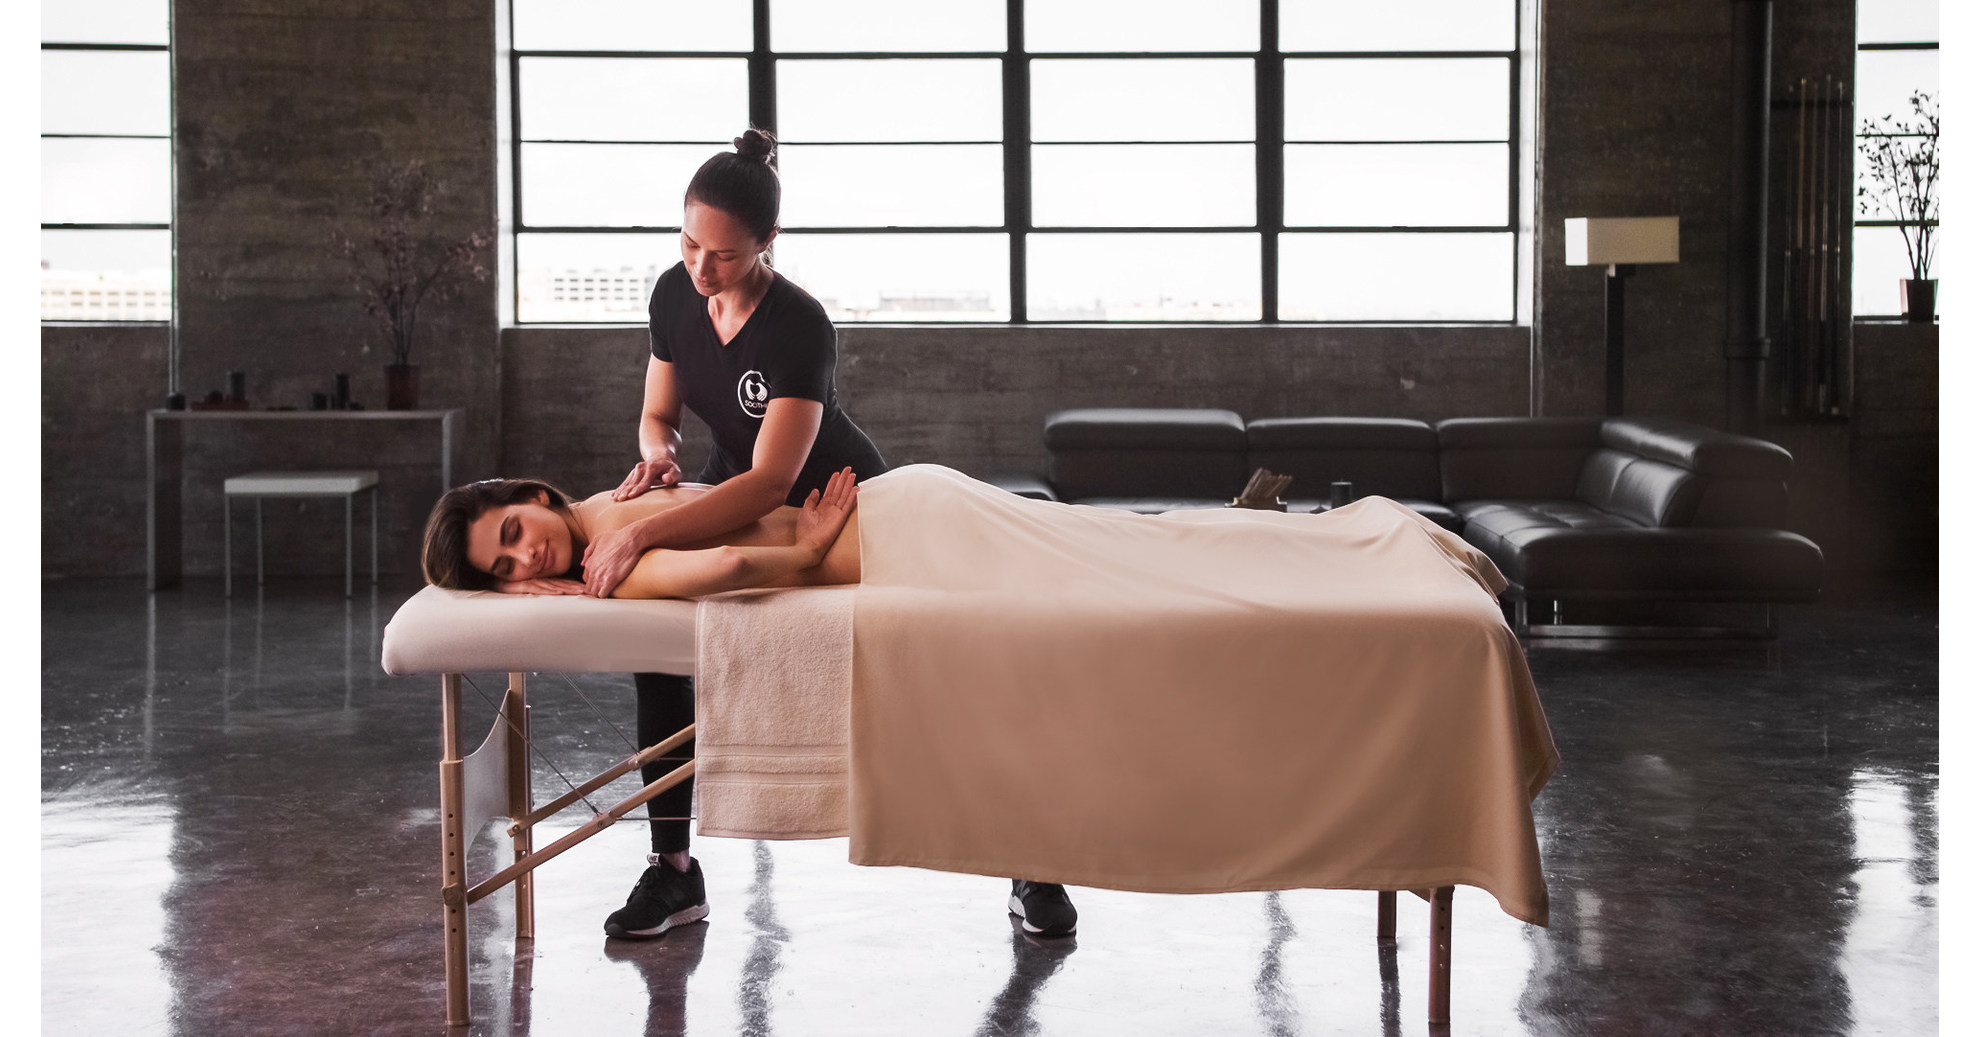 Leading On Demand Massage Provider Soothe Launches In Sacramento